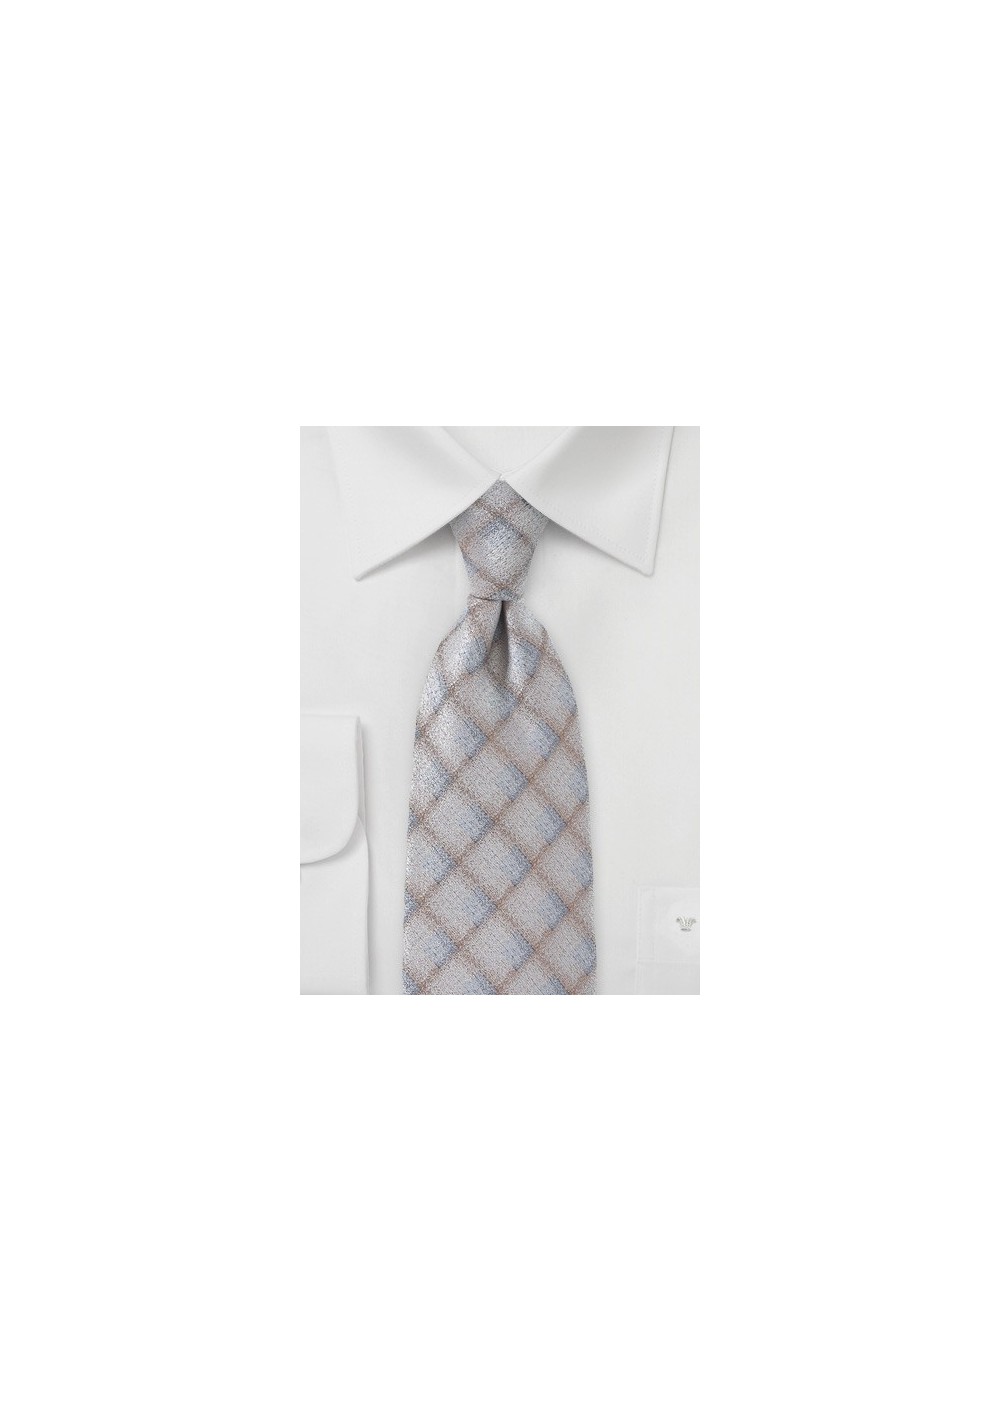 Diamond Tie in Heathered Taupes and Grays